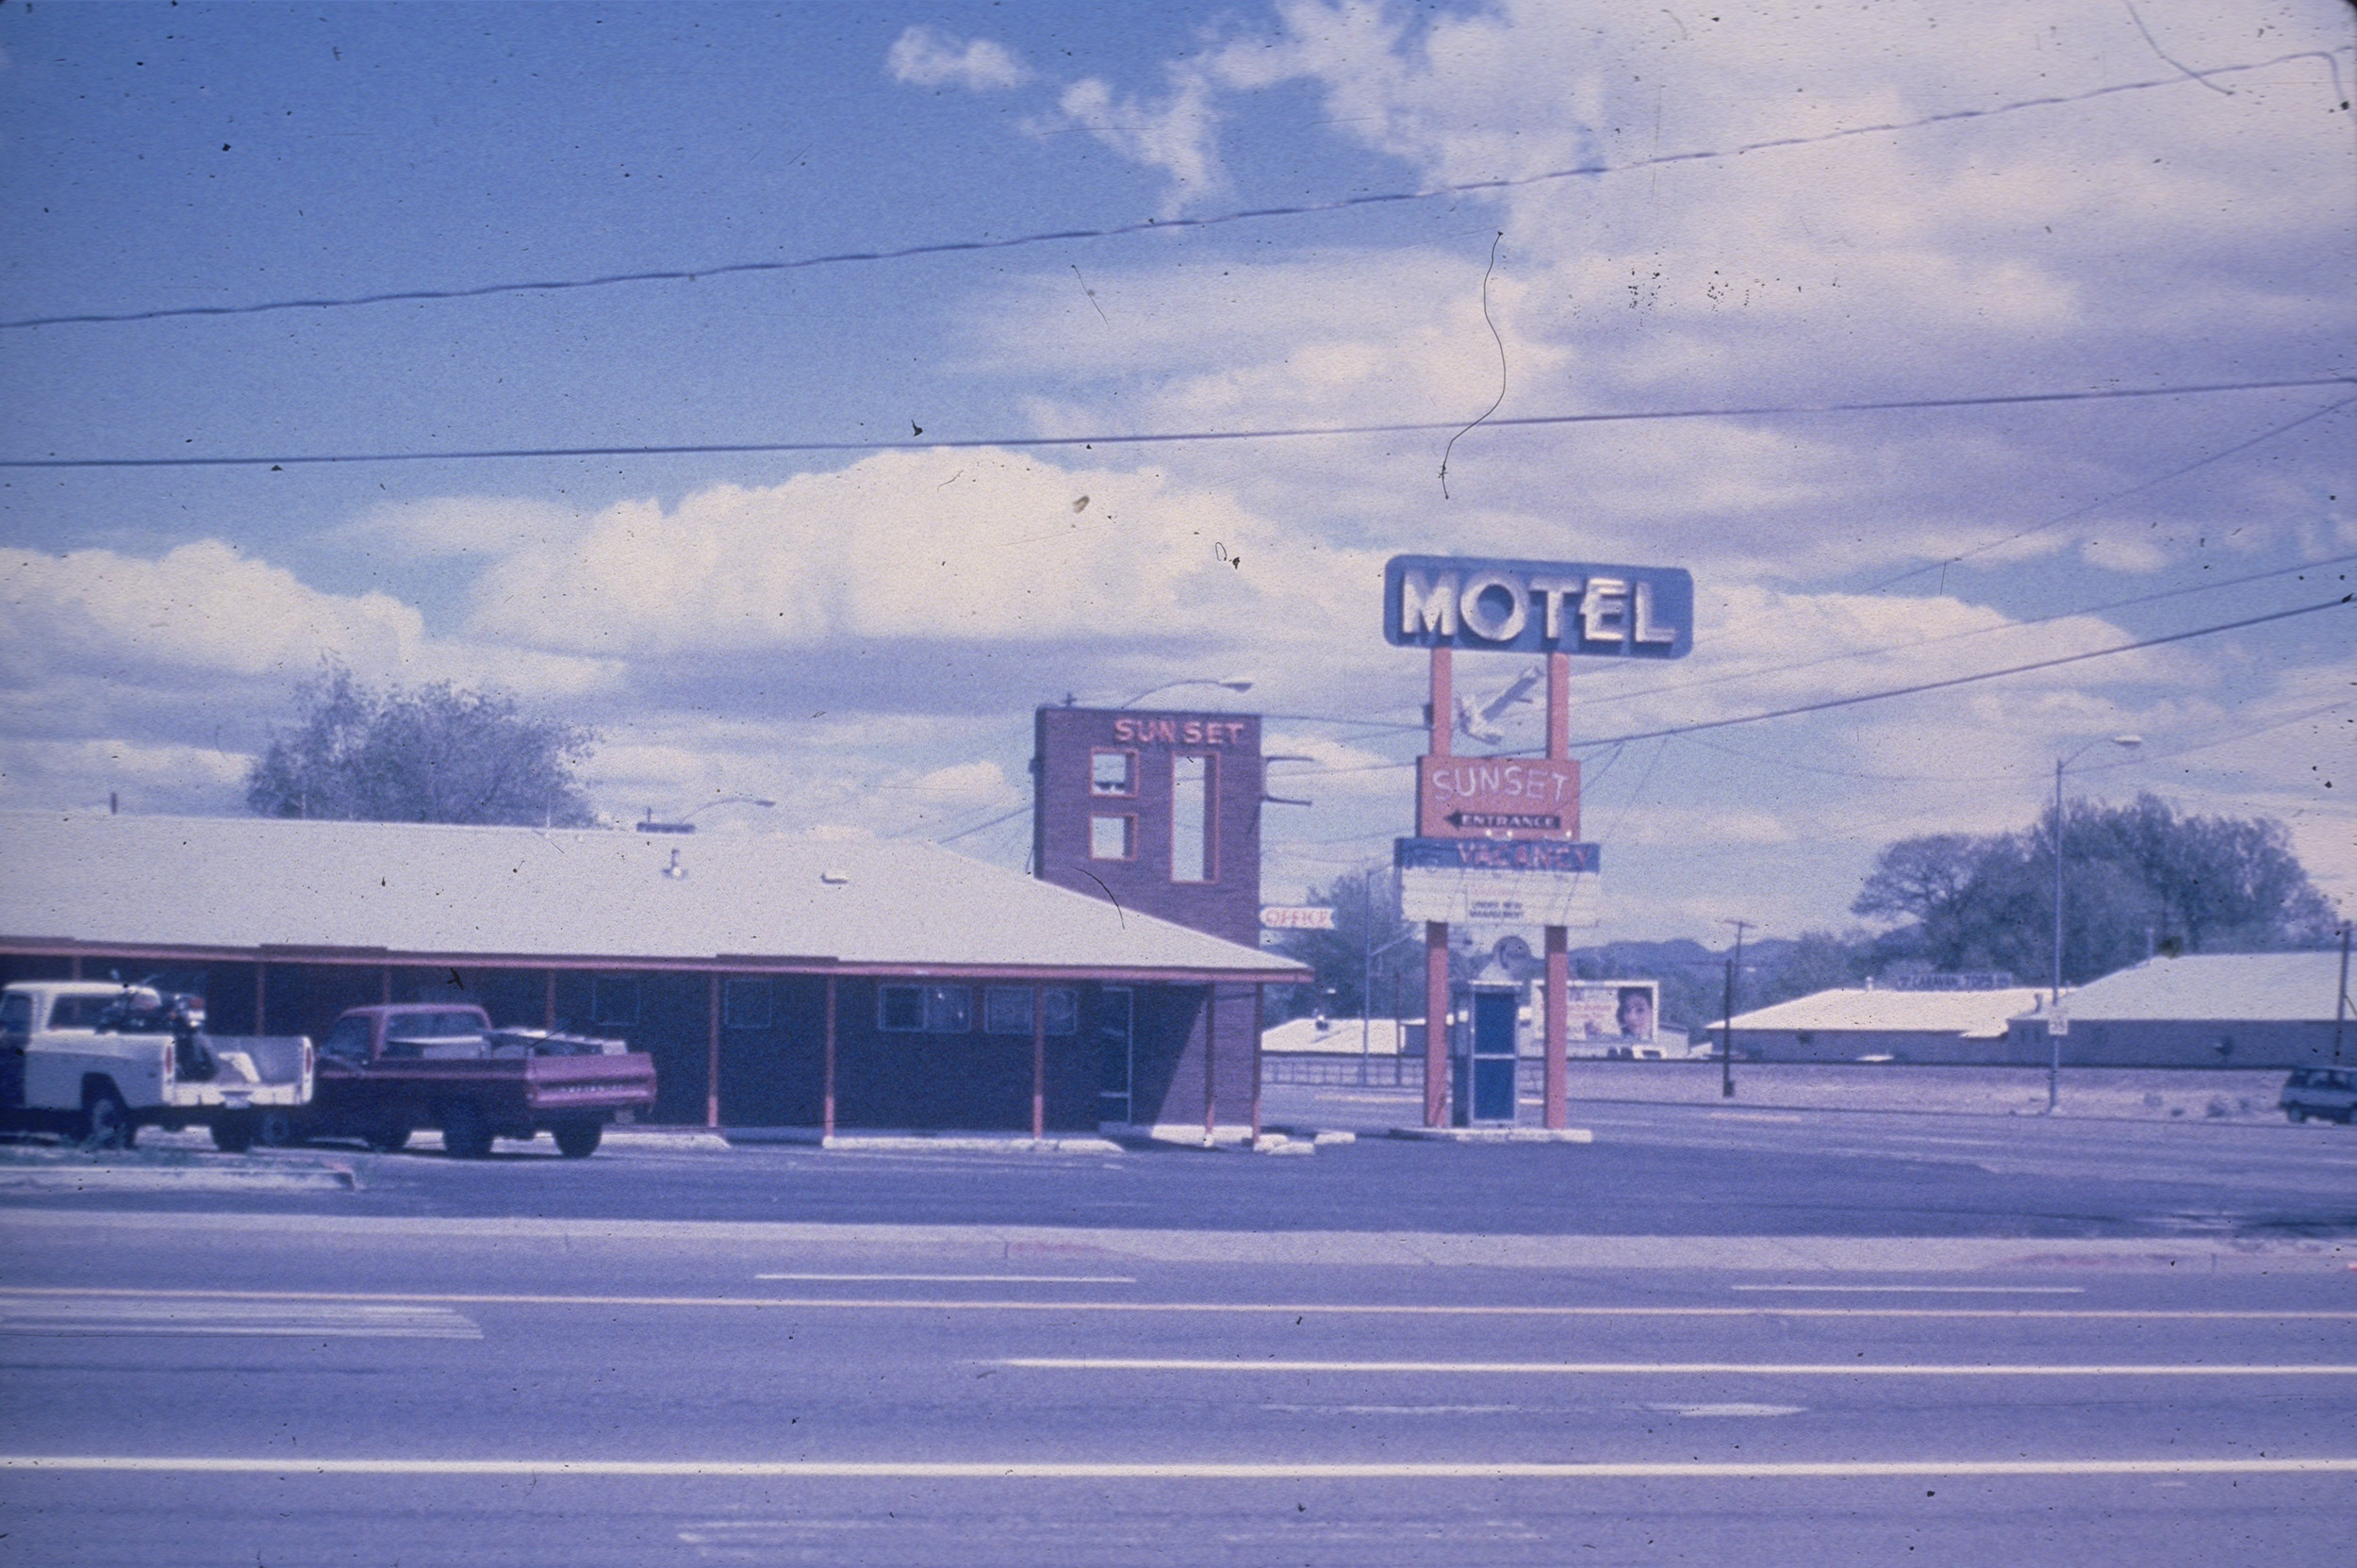 Slide of the Sunset Motel and its neon sign, Reno, Nevada, 1986